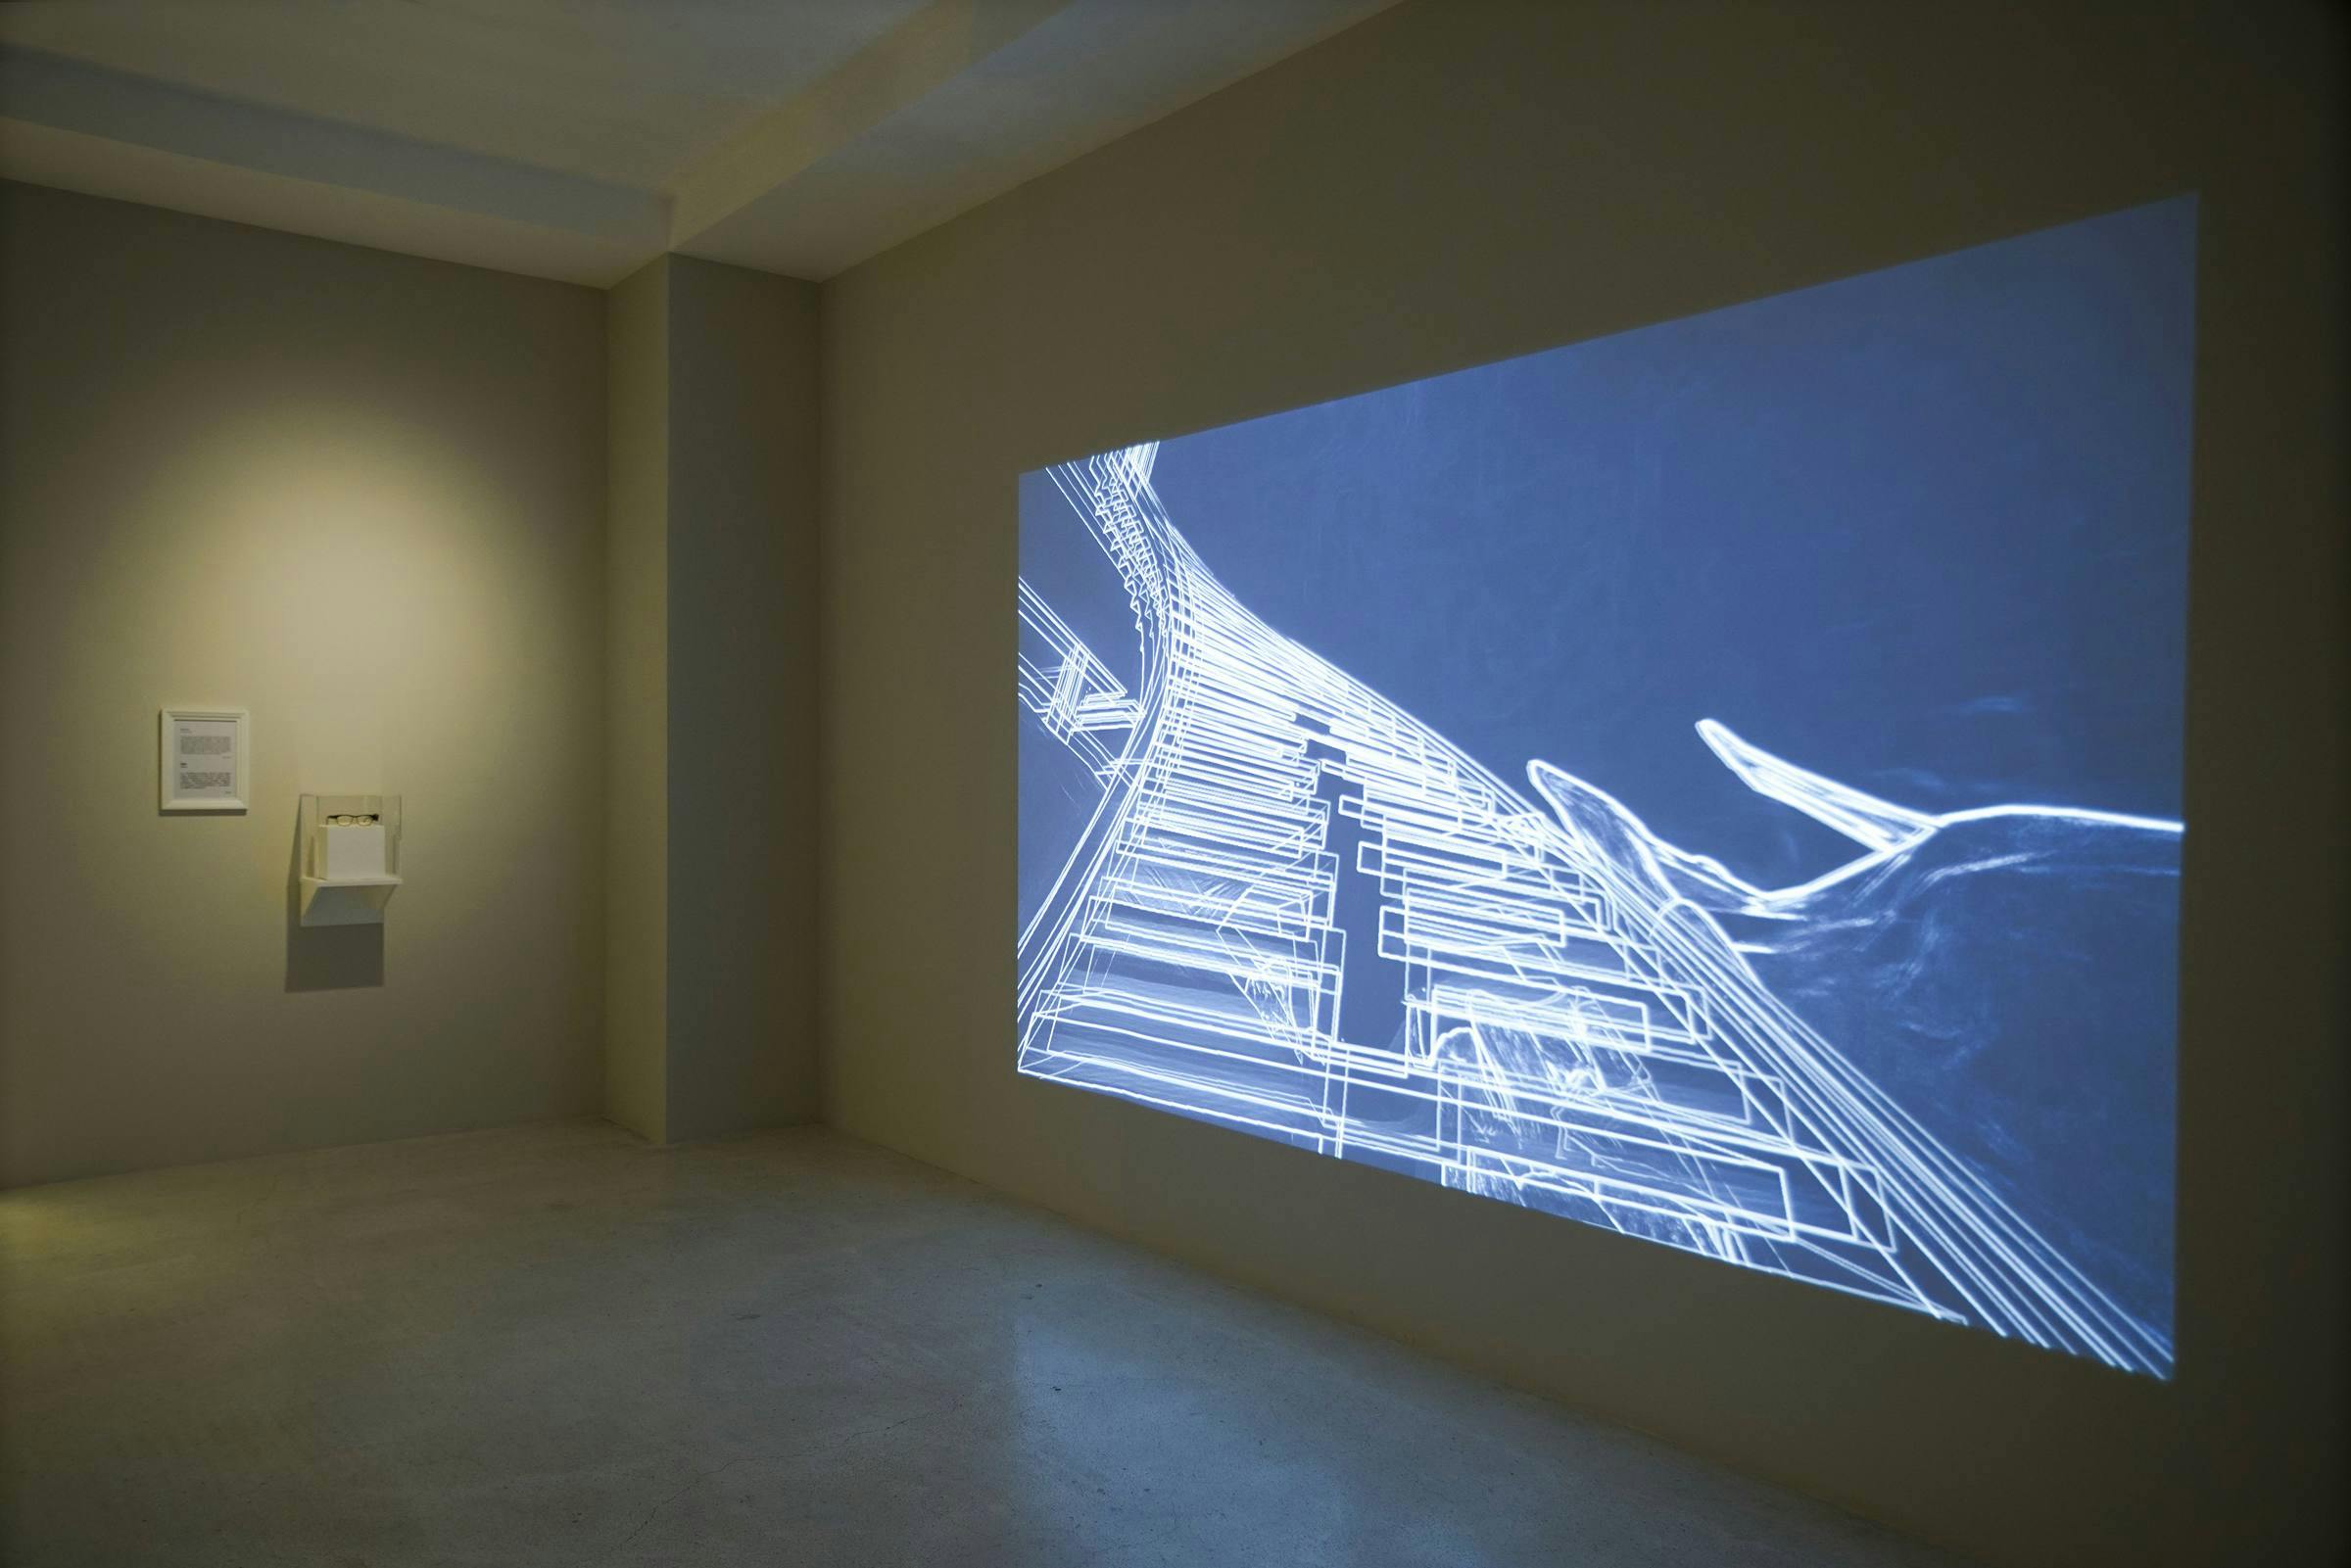 Image of a video being projected onto a concrete wall in a gallery space.